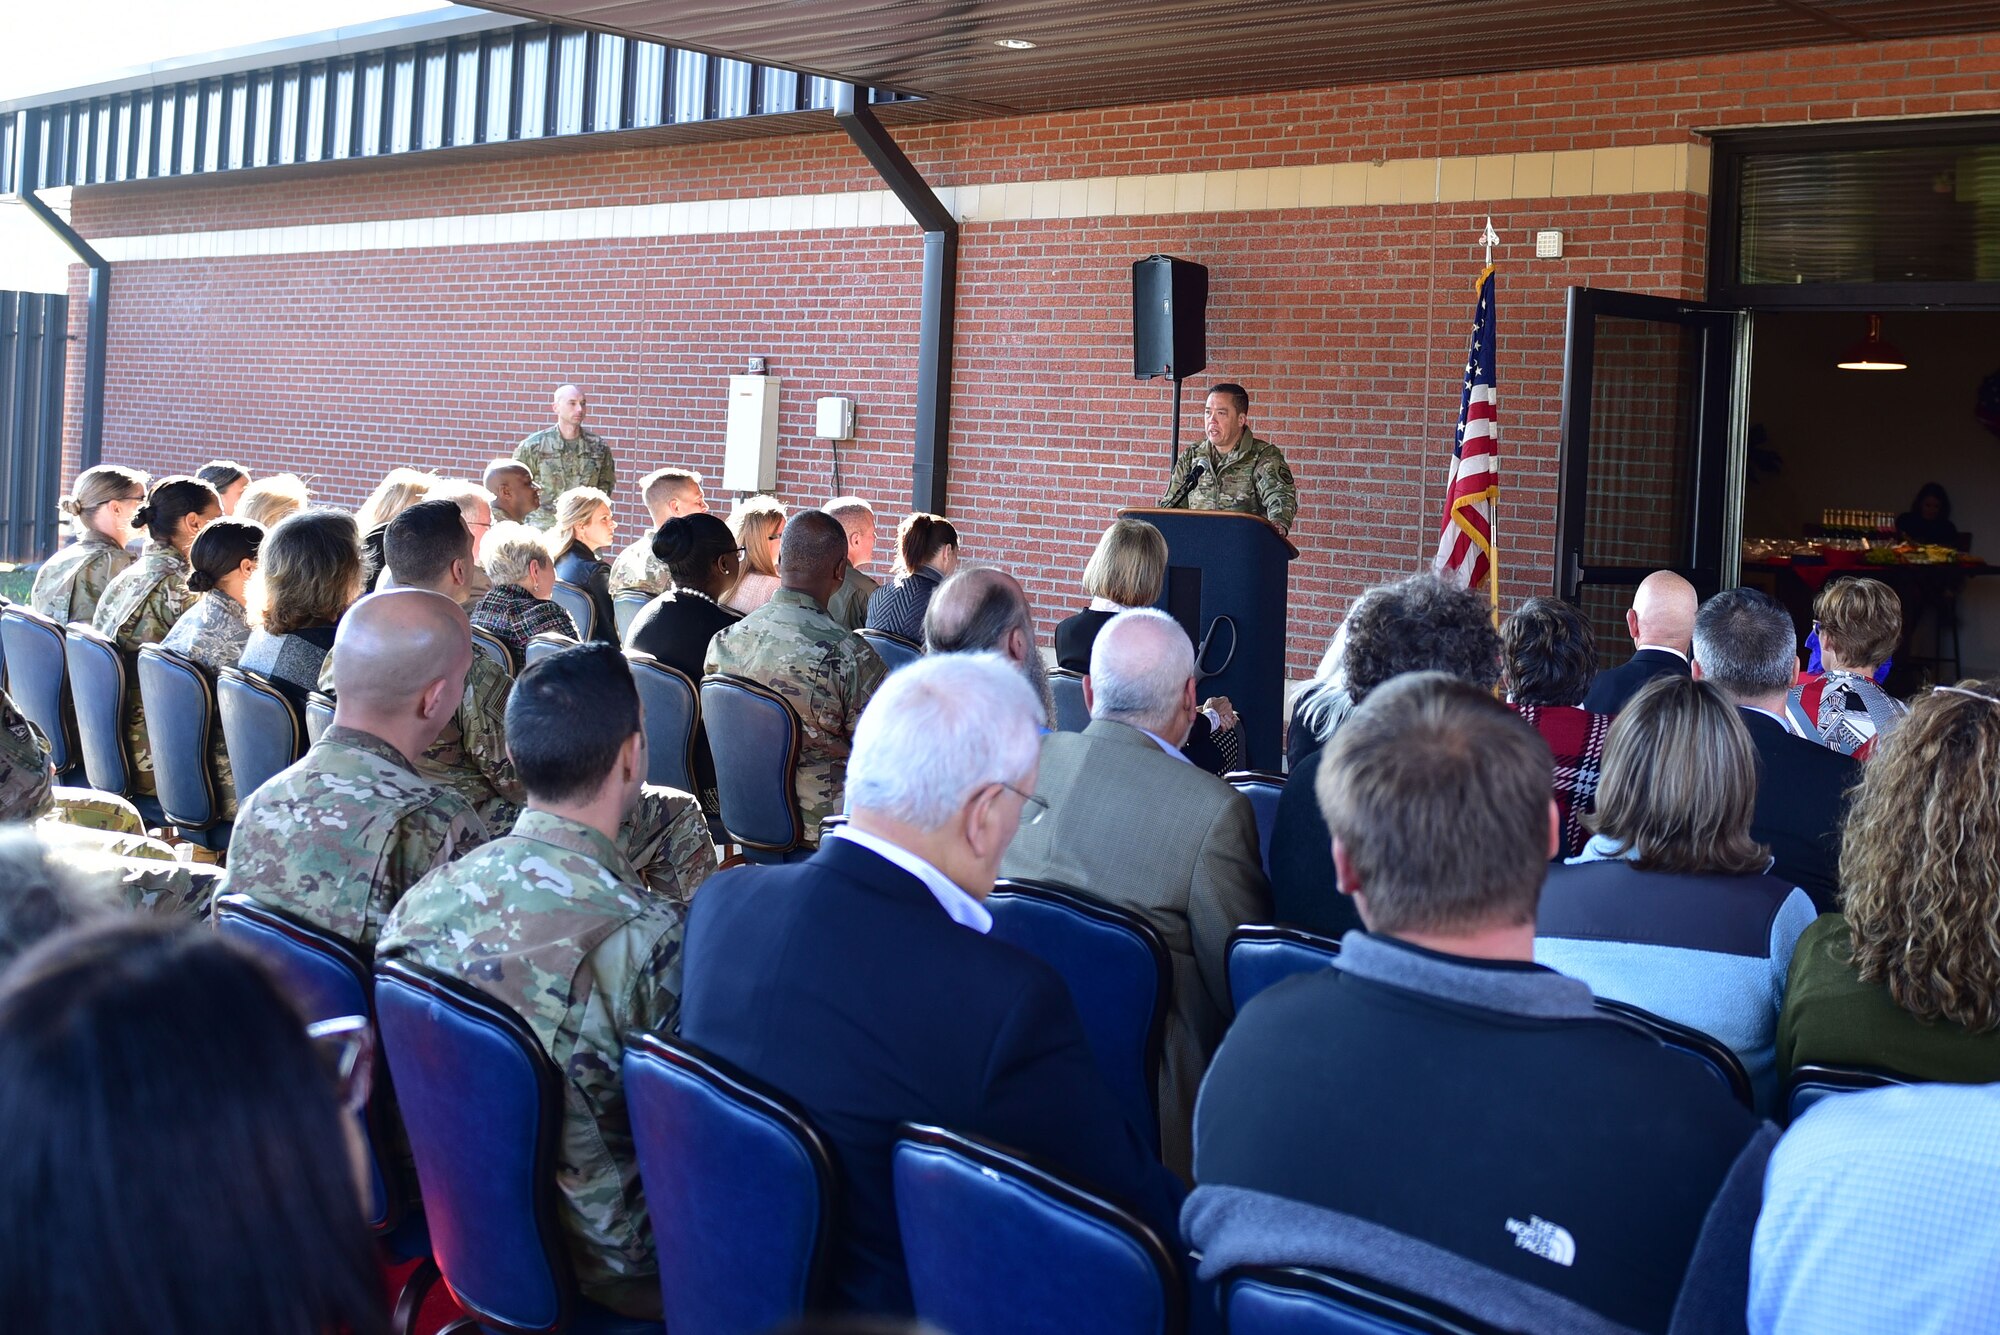 Col. Donn Yates, 4th Fighter Wing commander, addresses attendees at the ribbon cutting ceremony of a new USO of North Carolina center, Nov. 21, 2019, at Seymour Johnson Air Force Base, N.C. The new USO of NC – SJAFB Center includes a coffee station, lounge area, conference table and the first ever USO E-Sports gaming arena. (U.S. Air Force photo by Senior Airman Victoria Boyton)